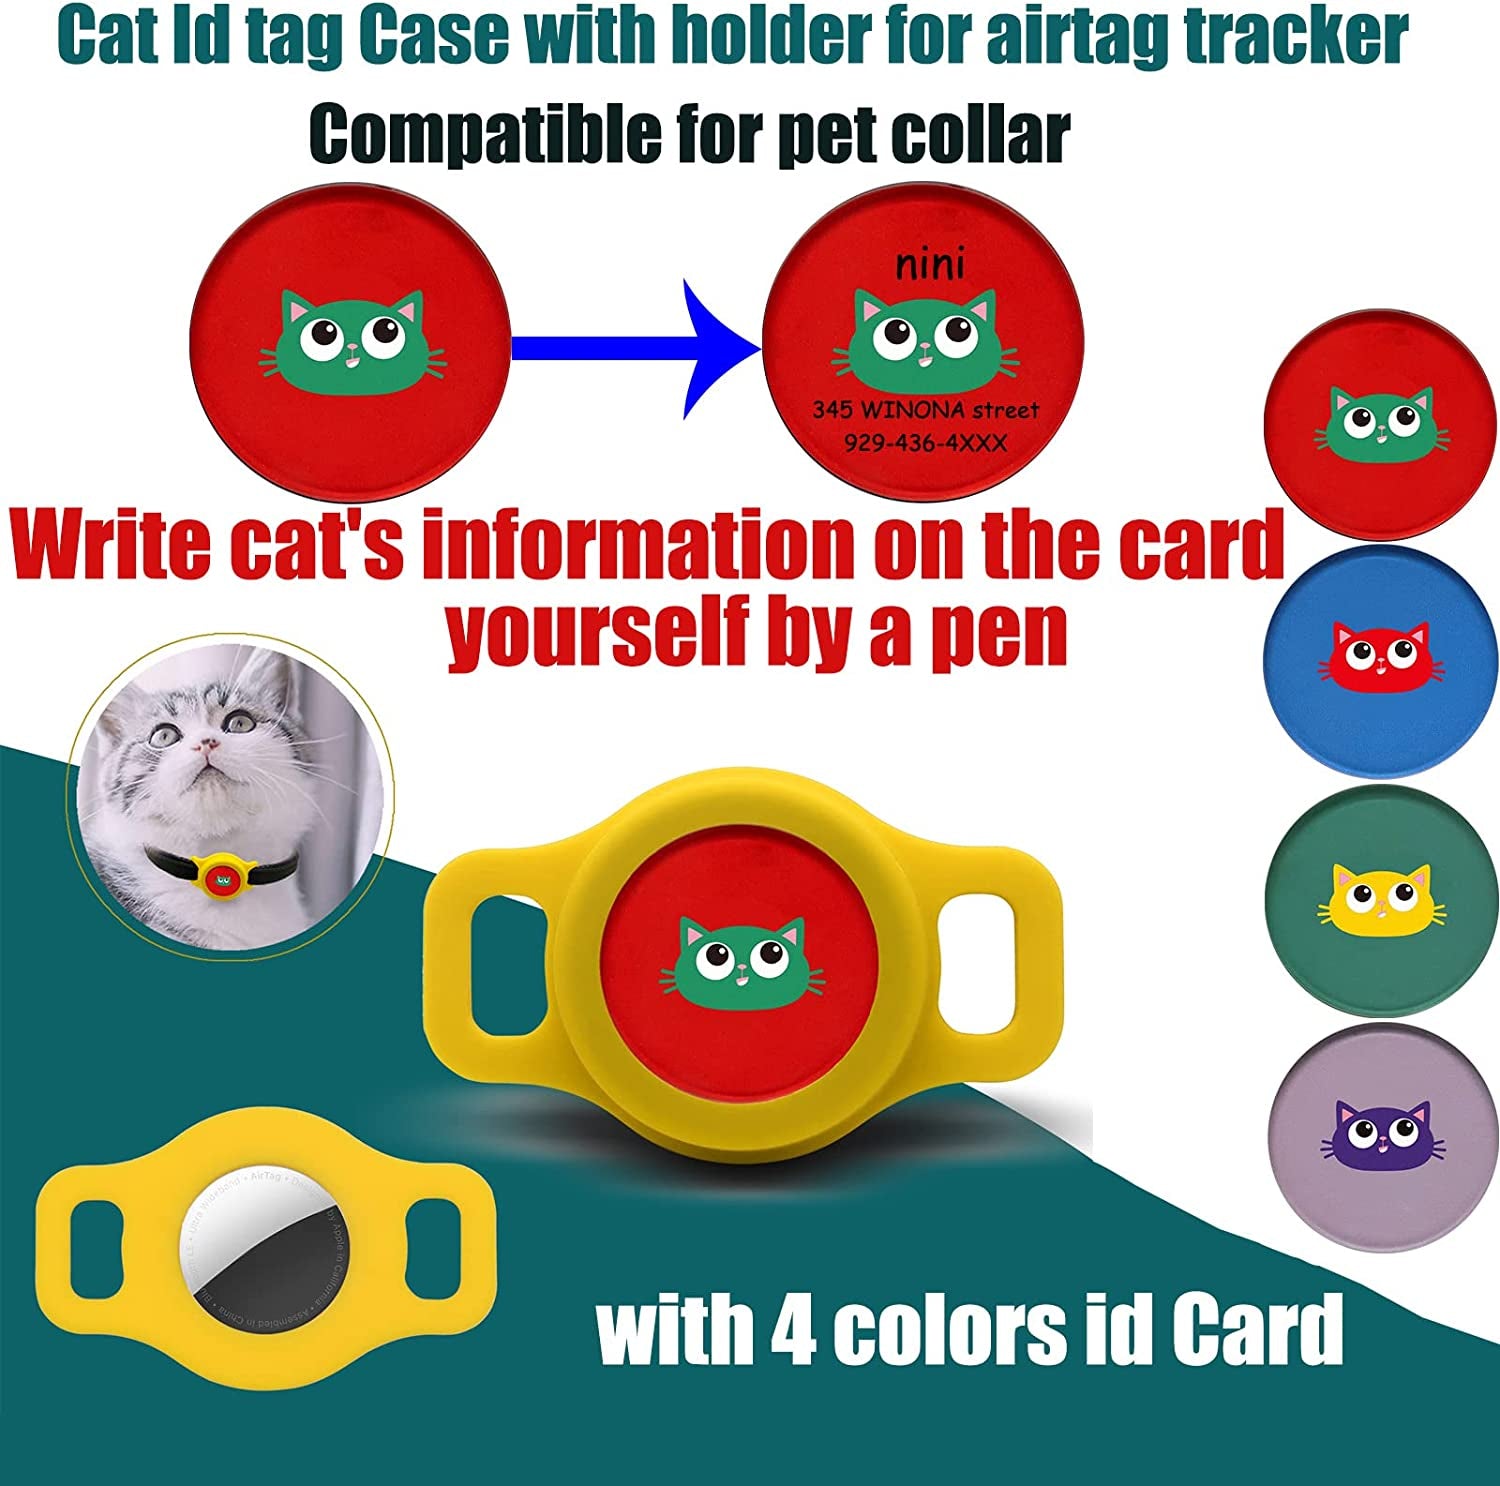 EXIEUSKJ Airtag Cat Collar Accessories Cat ID Tag, Lightweight, Handwriting and Cute Shapes, Cartoon Pet ID Tags Labels Compatible with Apple Airtag Tracker - Wine Red & Pink